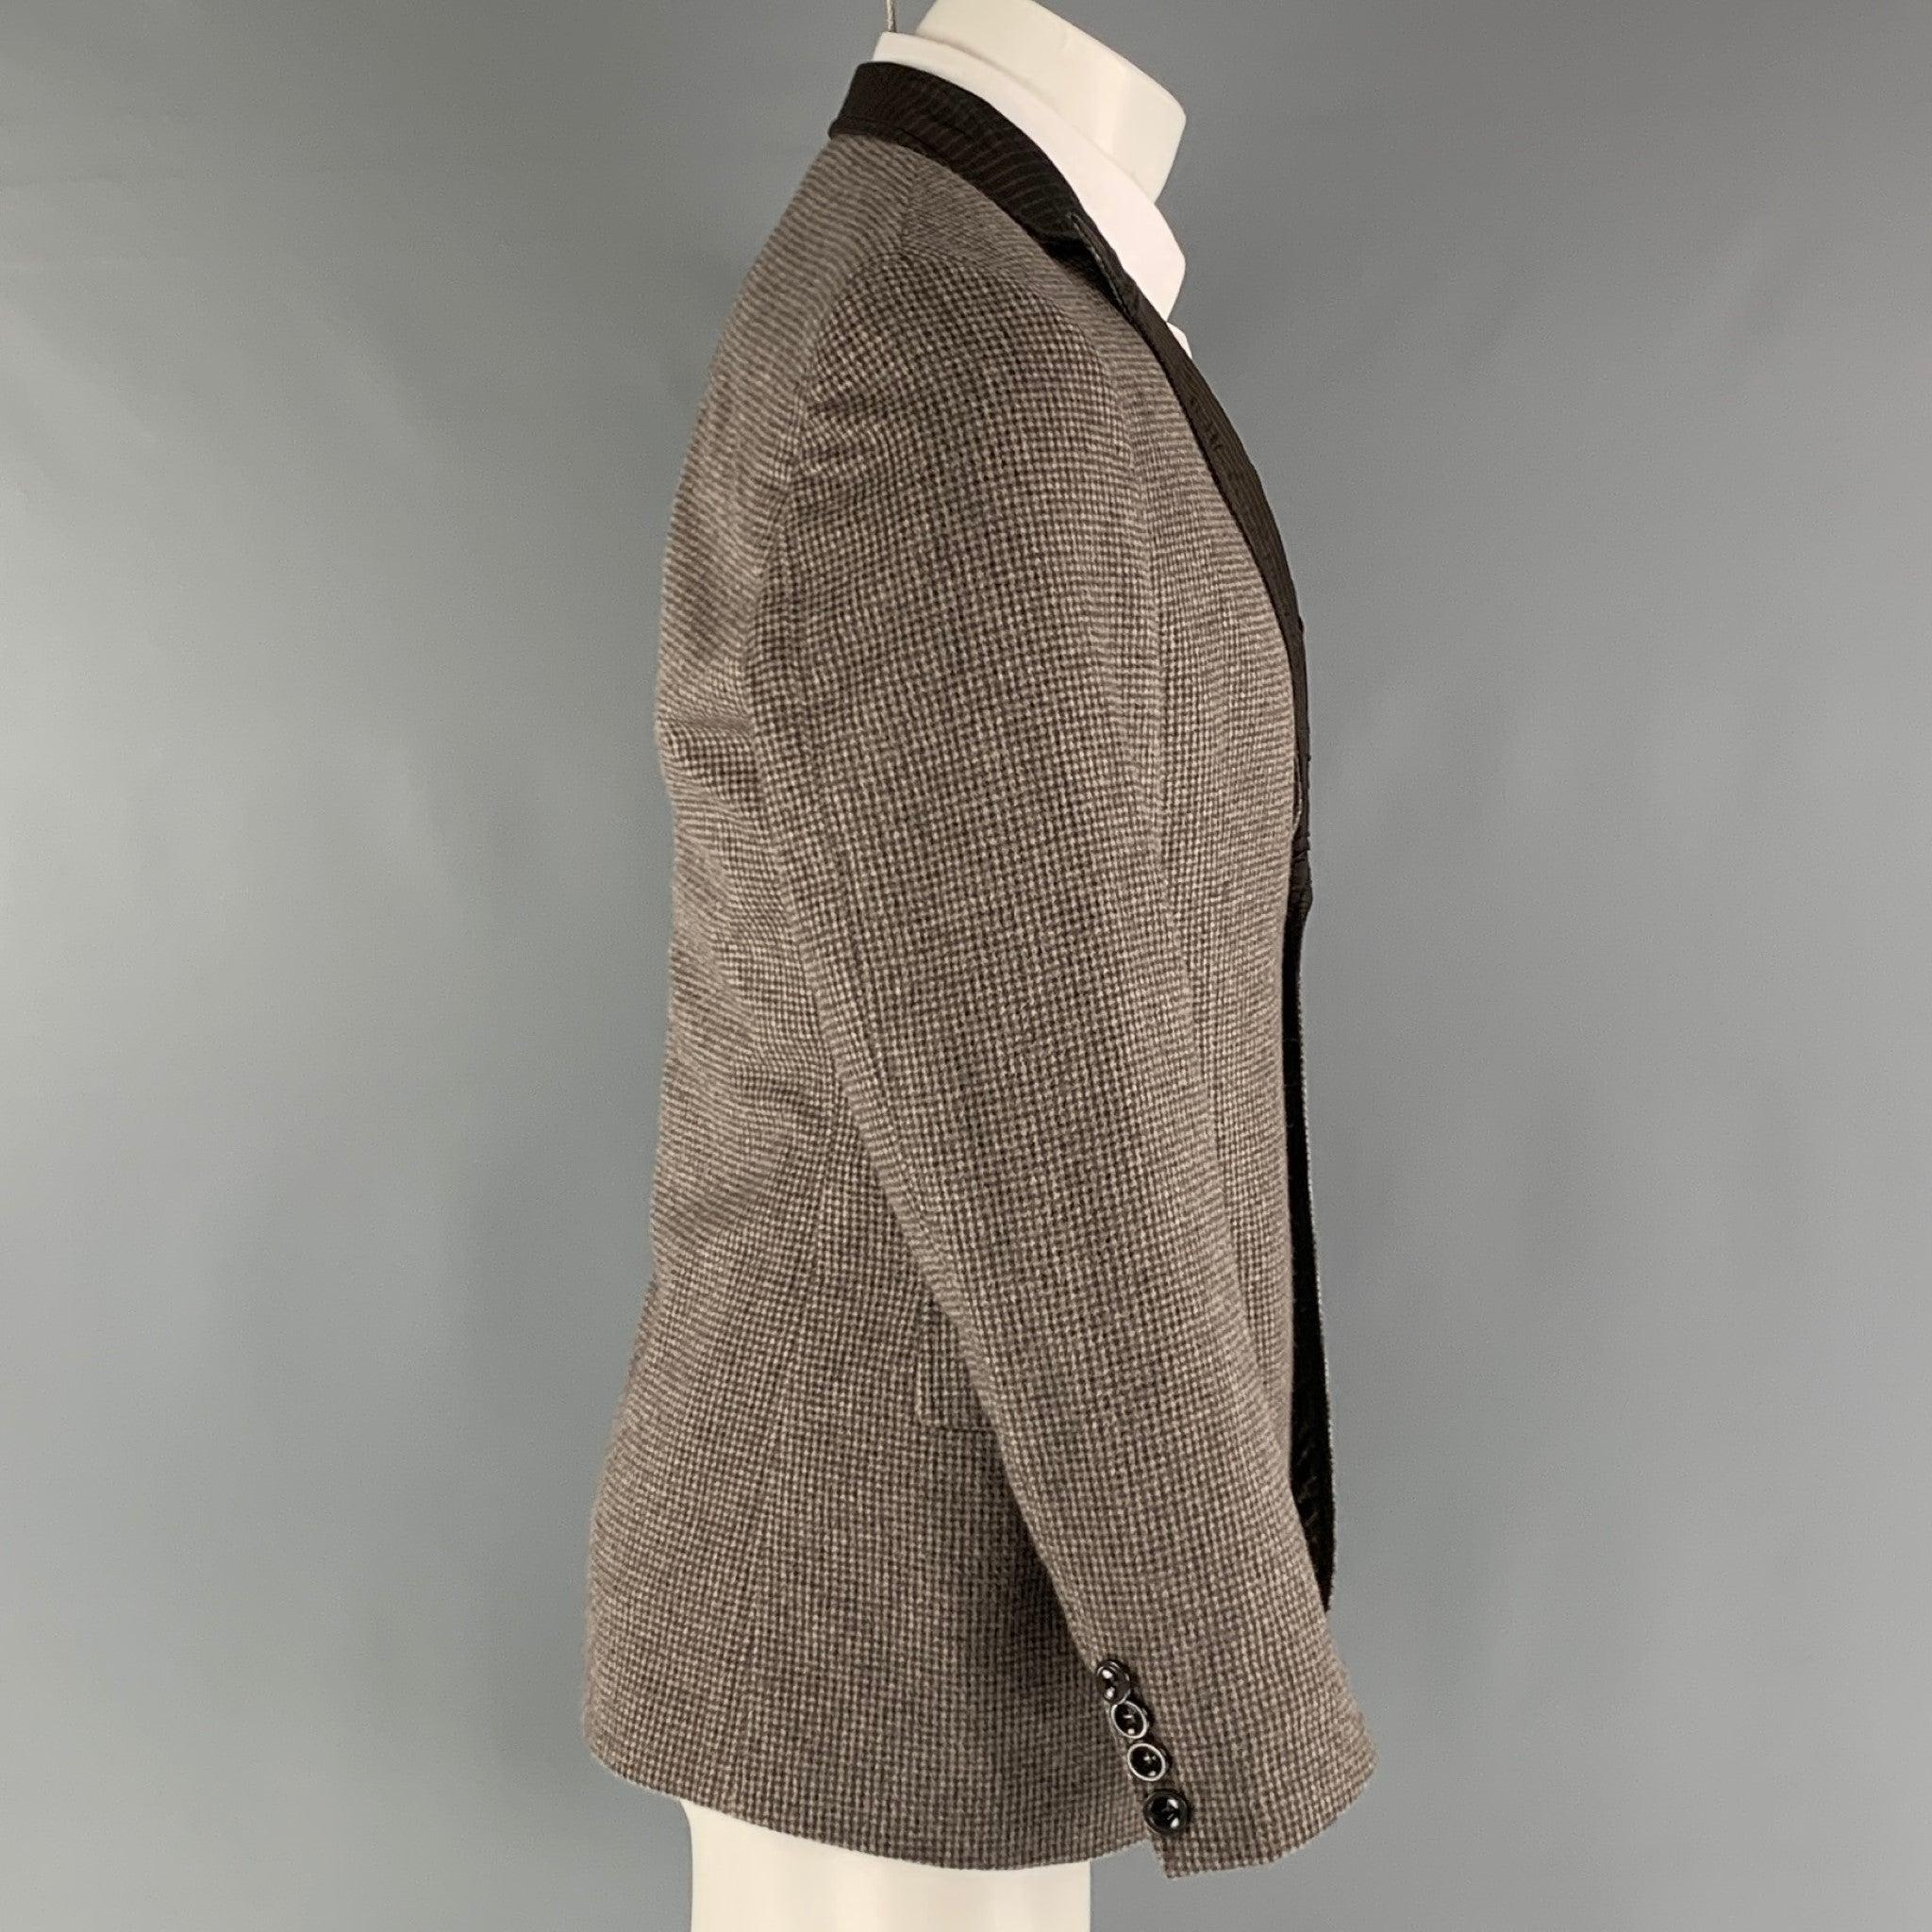 EMPORIO ARMANI sport coat comes in a brown, charcoal and grey checkered angora woven material with full lining featuring a peak lapel, patch pockets, and a two button closure. Made in Italy.Excellent Pre-Owned Condition. 

Marked:   IT 50